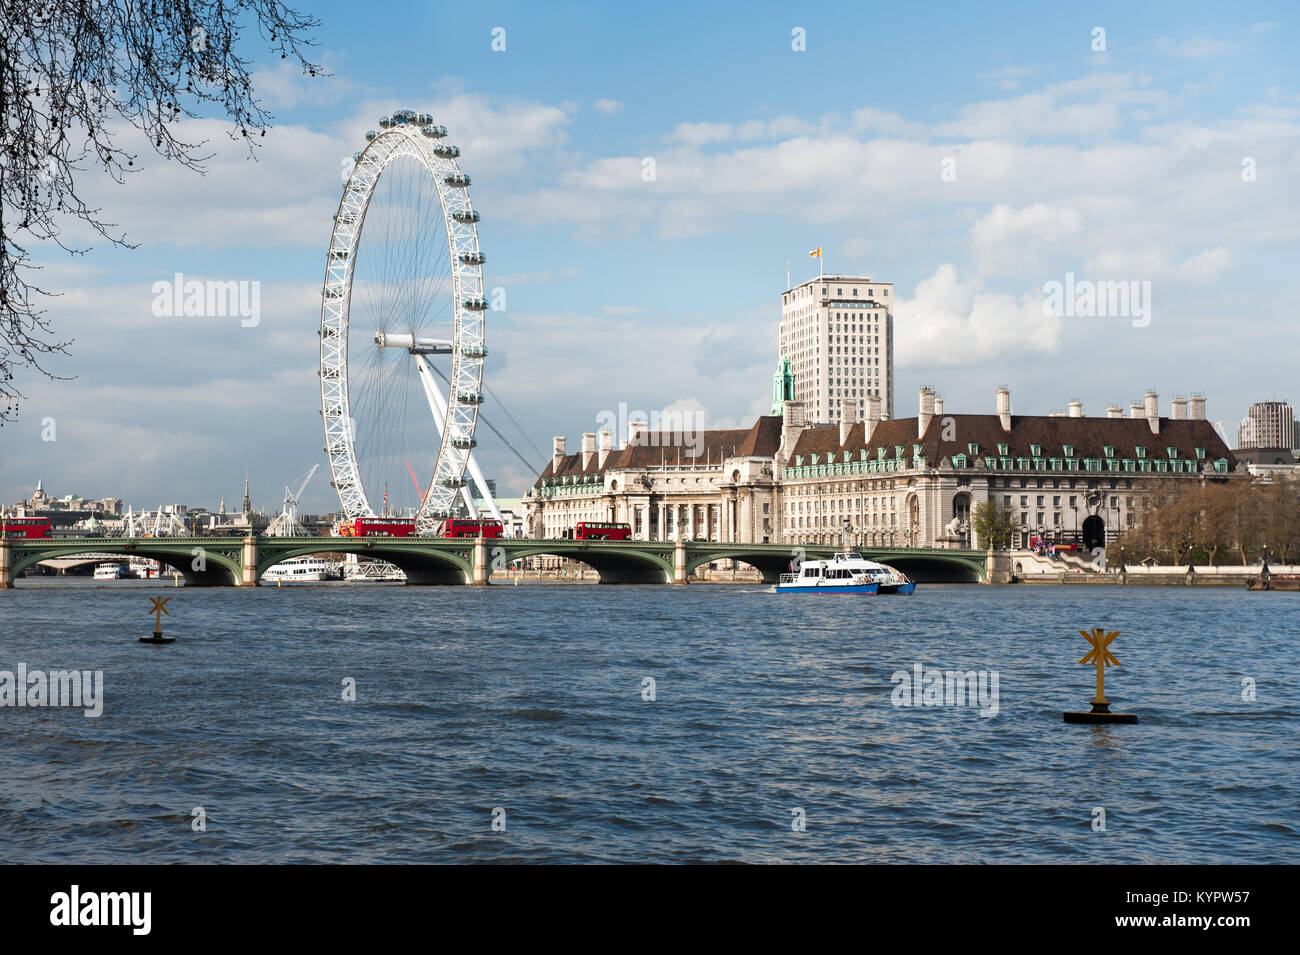 London Eye and buildings on the South Bank of Thames river in London Stock Photo